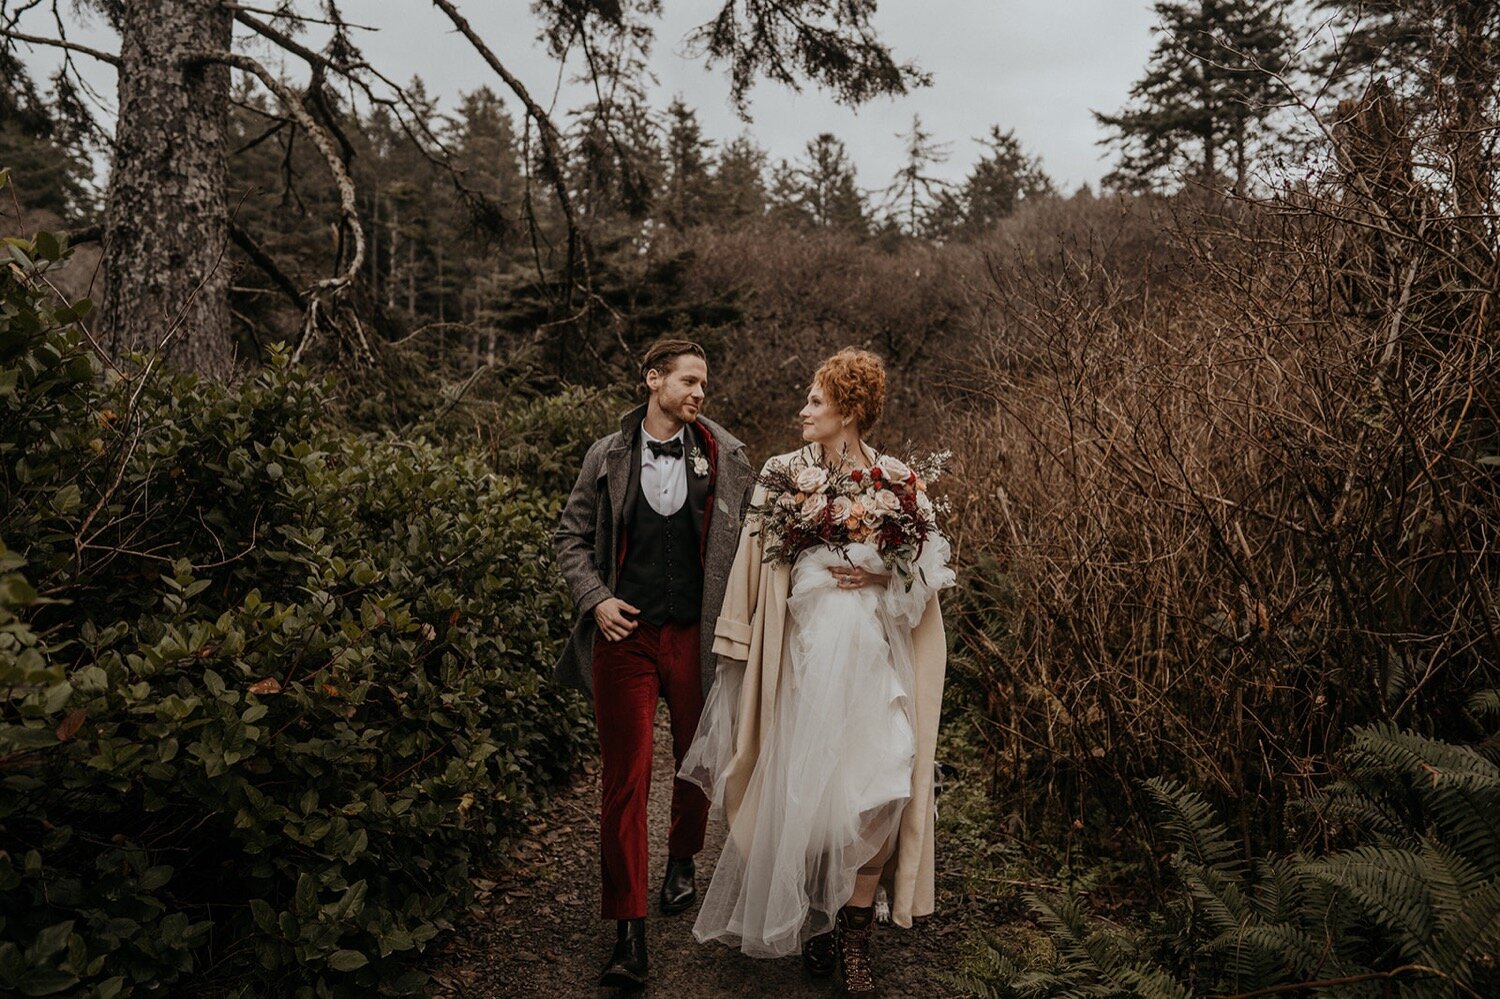 Beautiful-Winter-Elopement-in-Olympic-National-Park's-Hoh-Rainforest-57.jpg